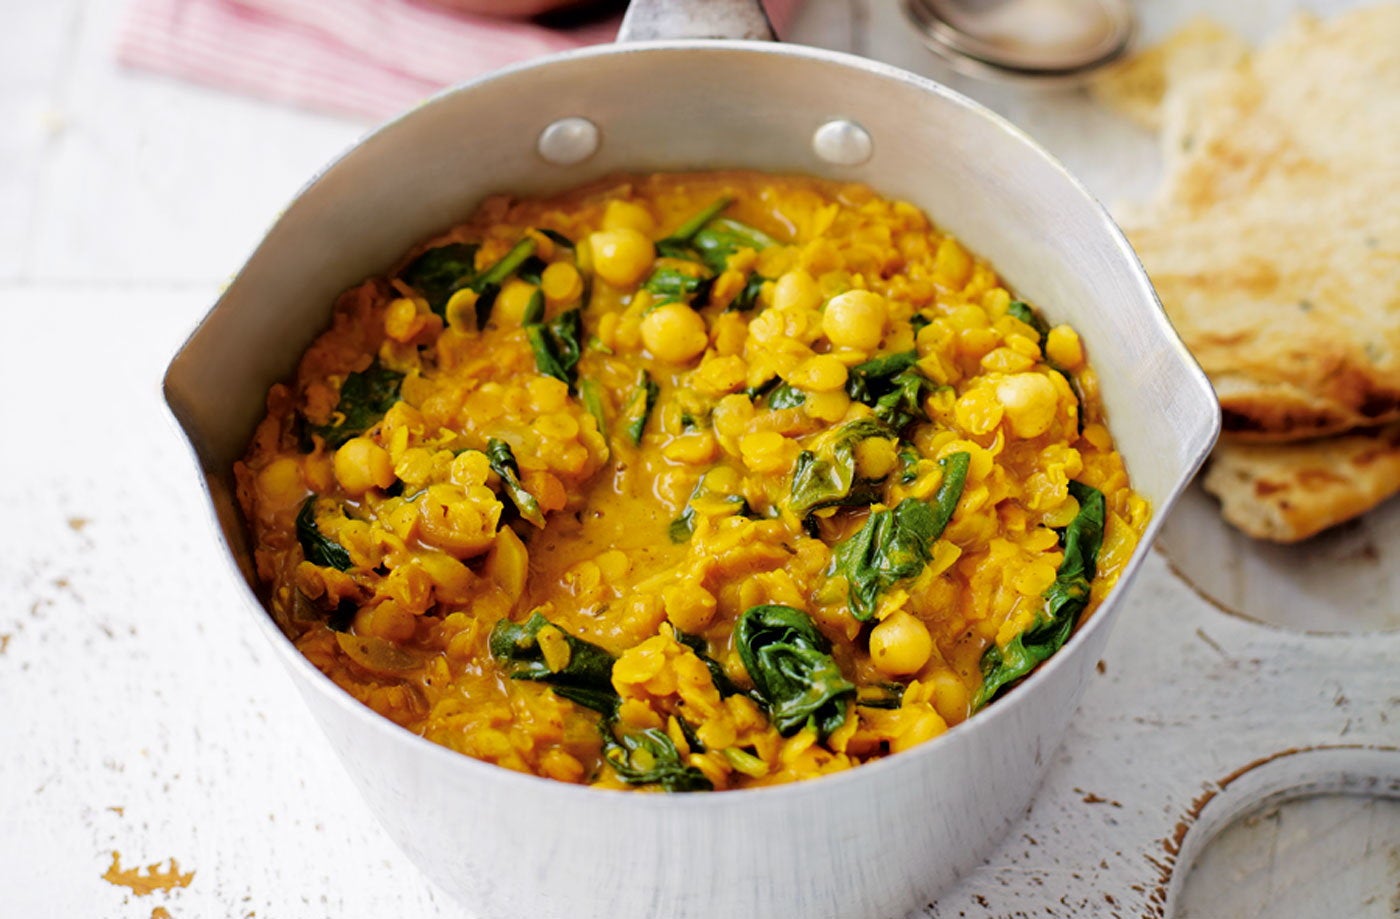 A quick and tasty dhal to keep away the chill